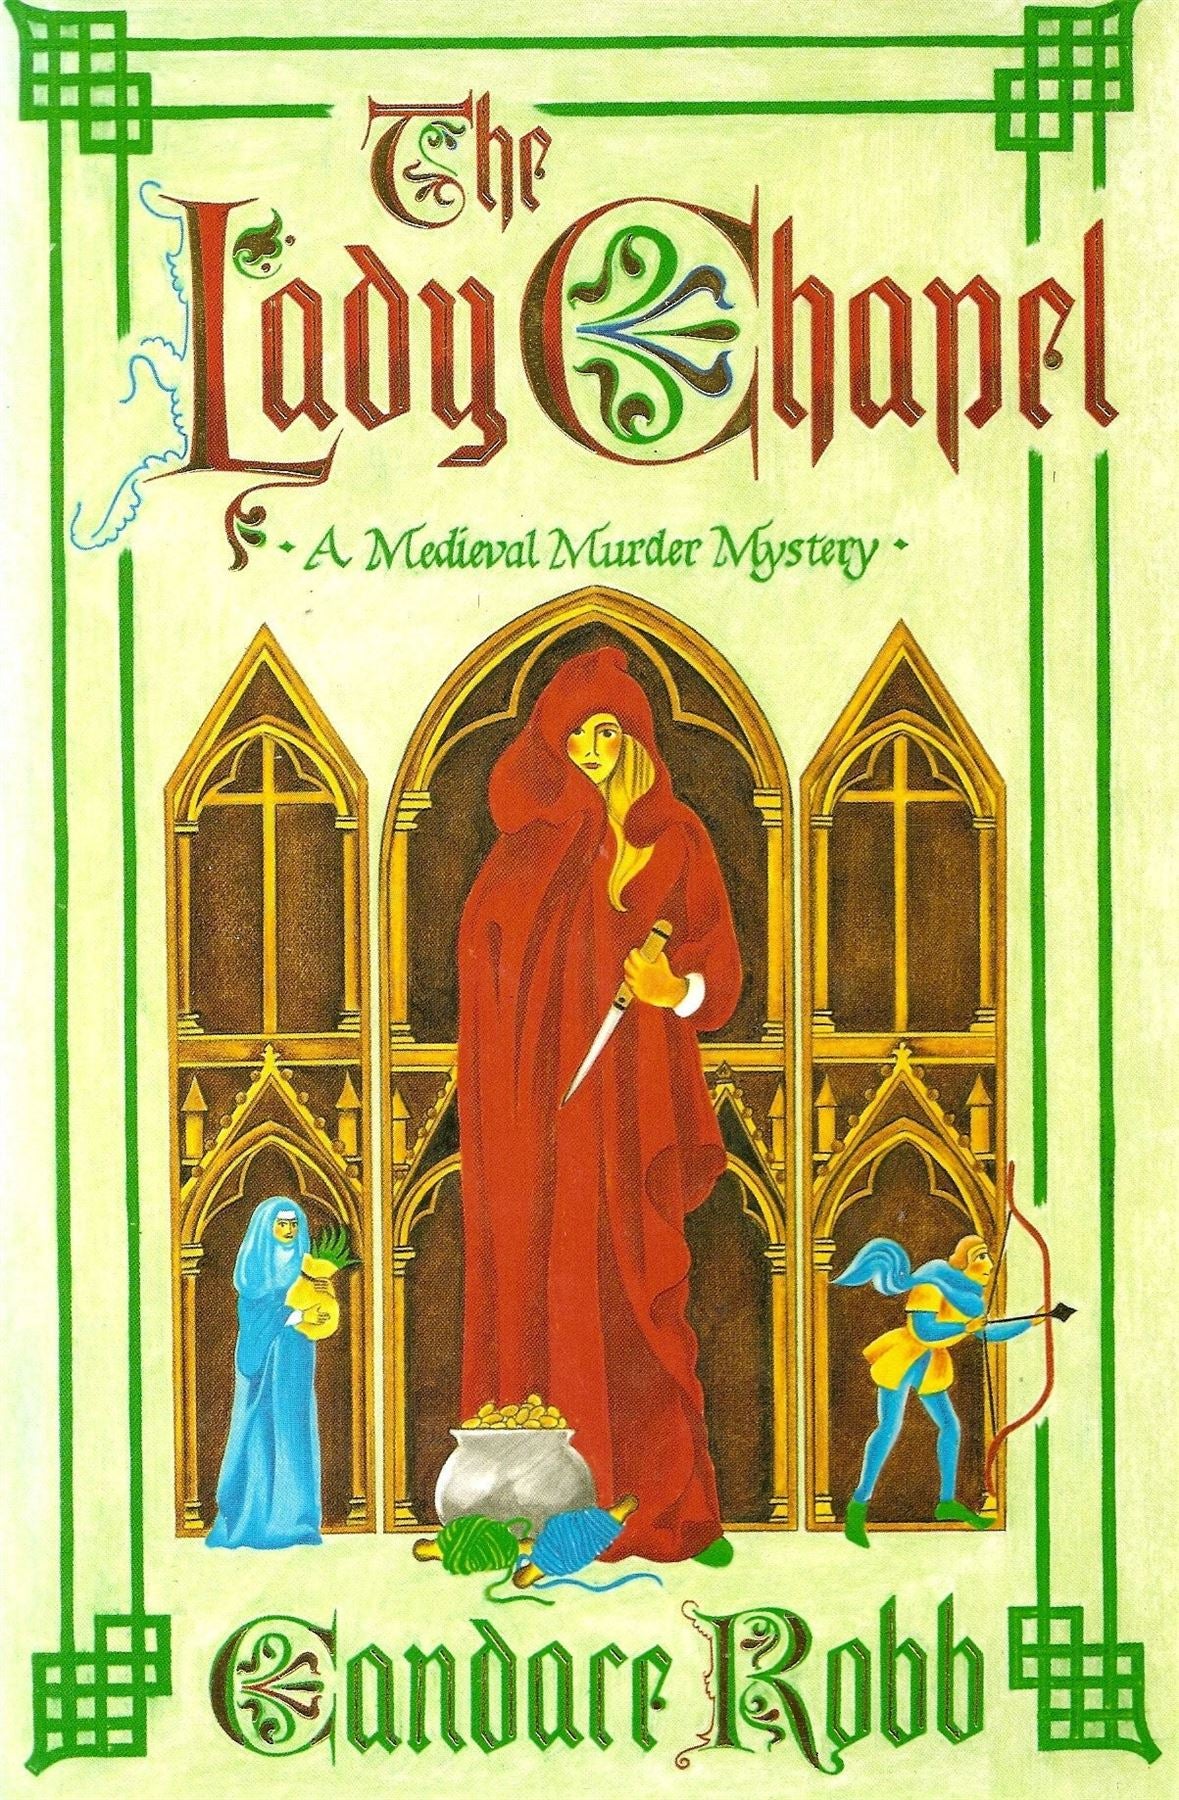 The Lady Chapel: A Medieval Murder Mystery